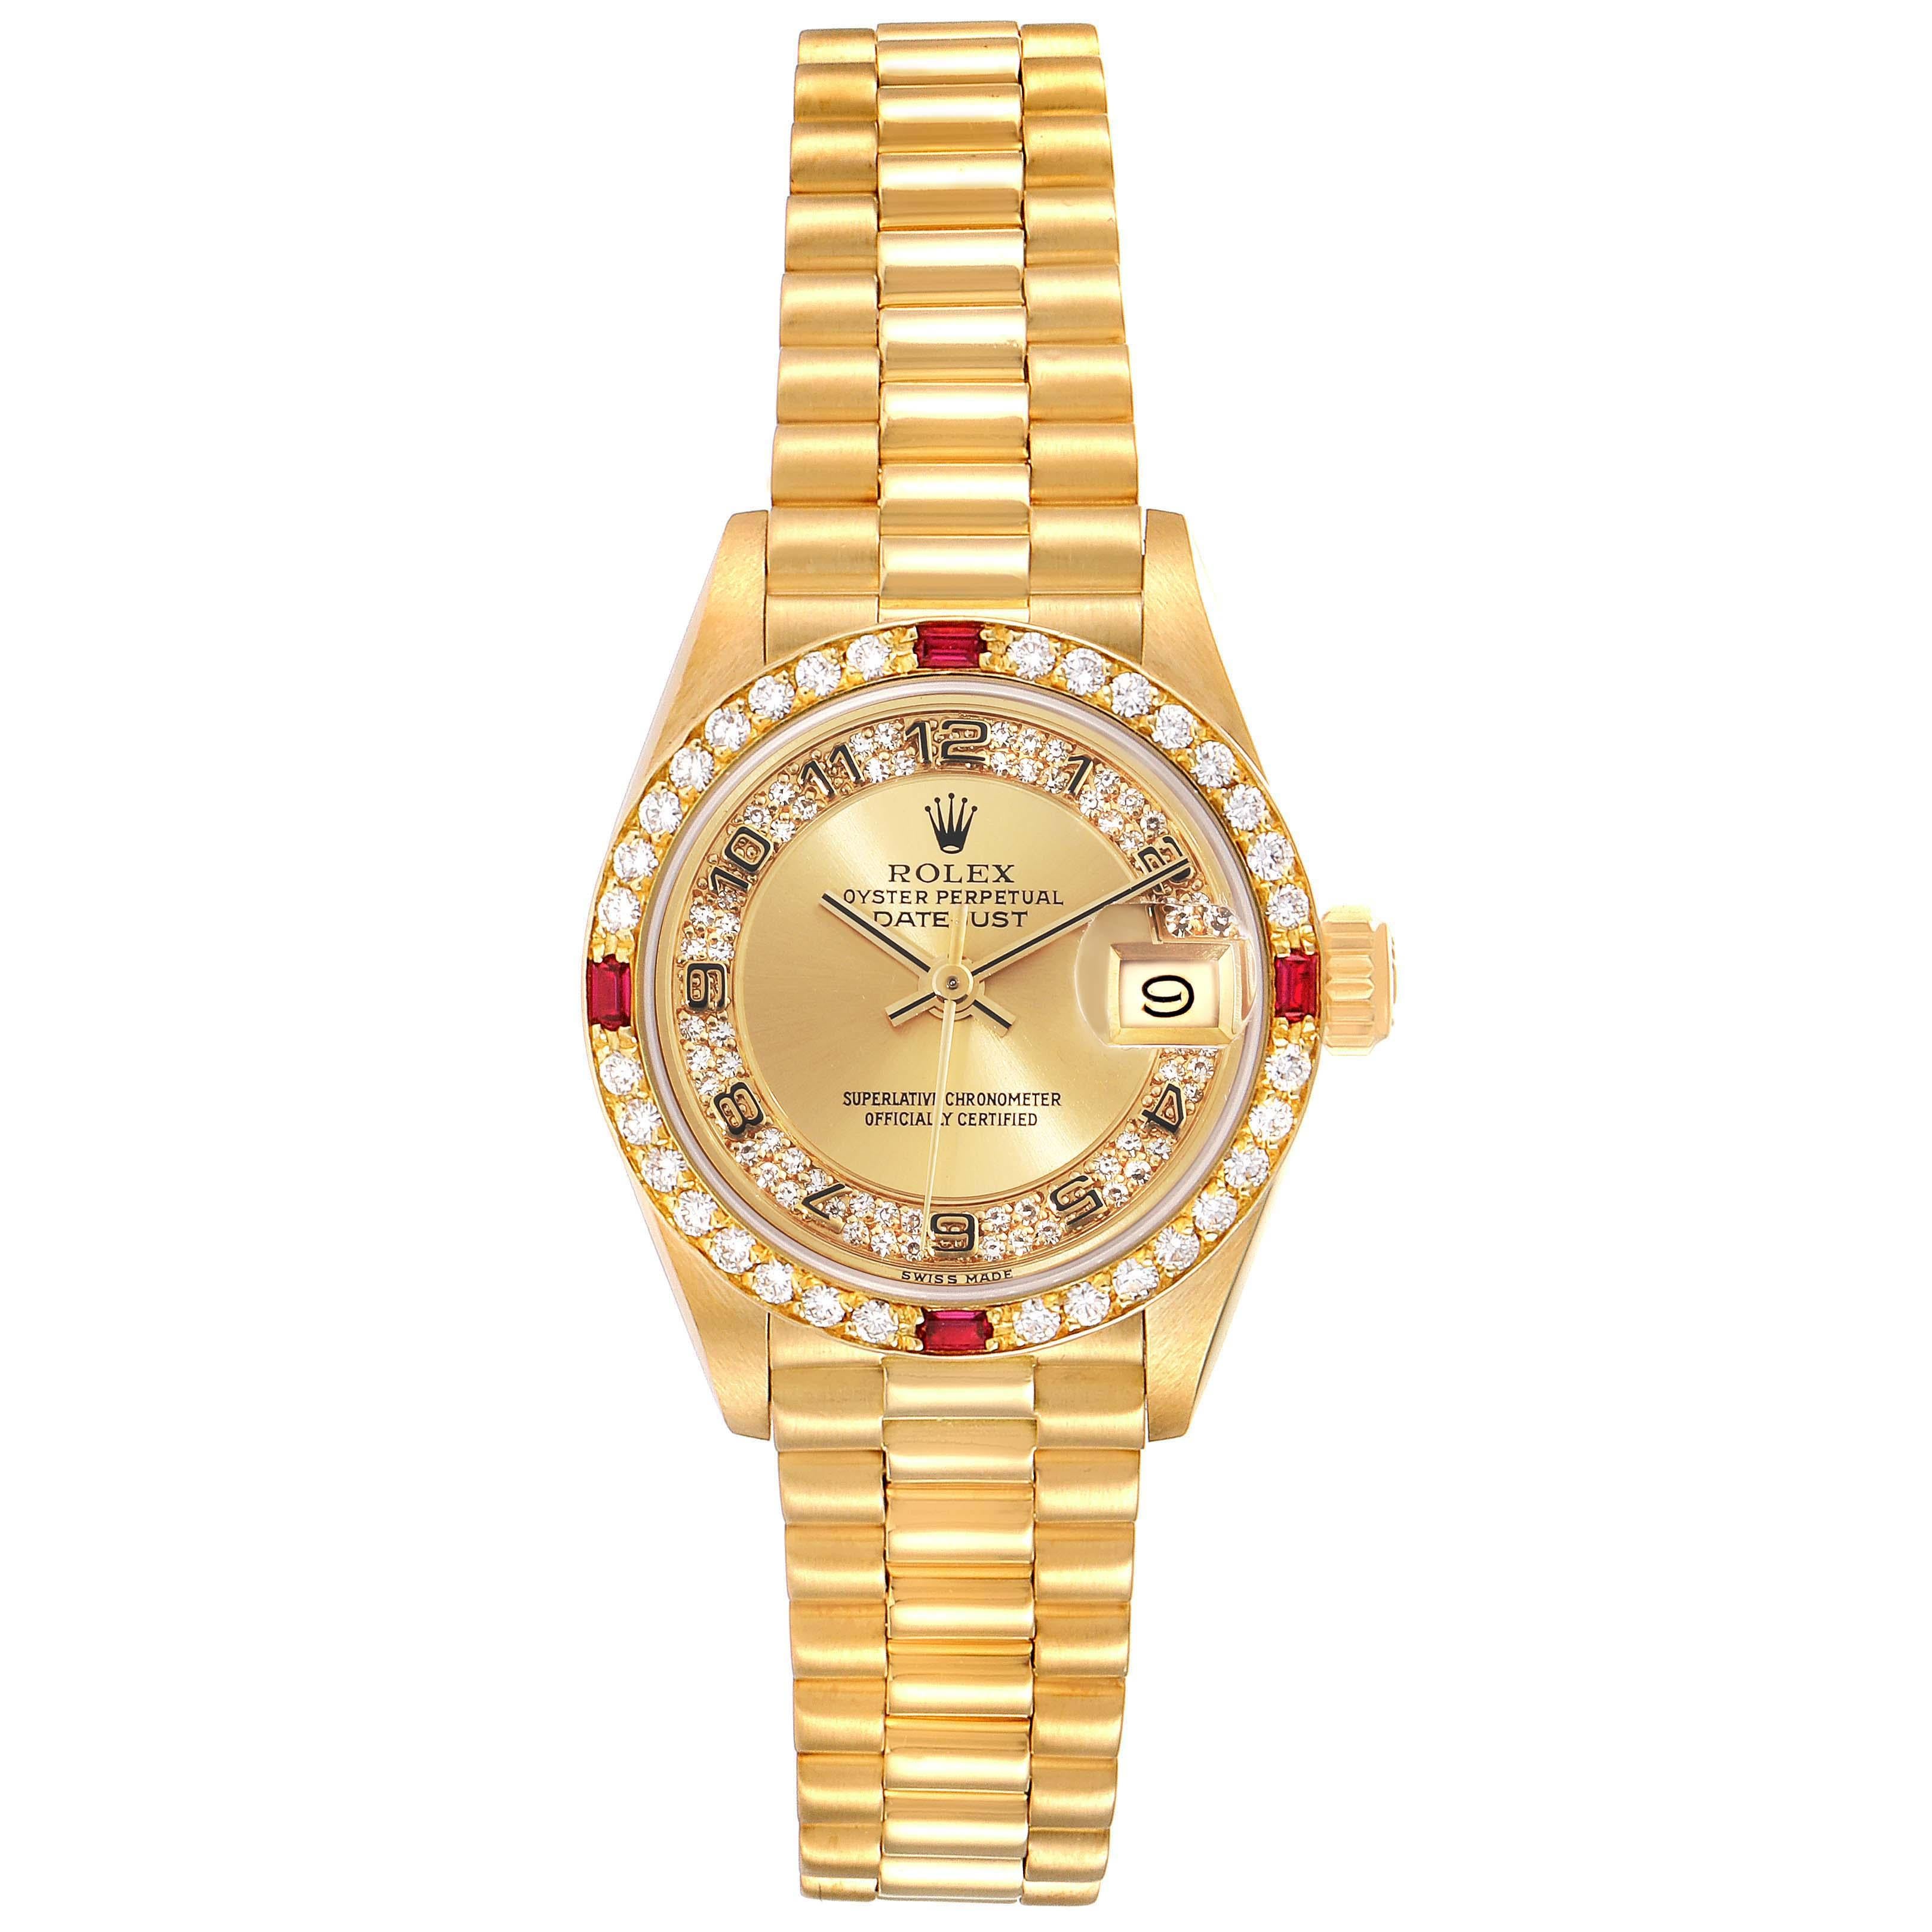 Rolex President Datejust Yellow Gold Diamond Ruby Ladies Watch 69068 Box Papers. Officially certified chronometer automatic self-winding movement. 18k yellow gold oyster case 26.0 mm in diameter. Rolex logo on a crown. Original Rolex factory diamond